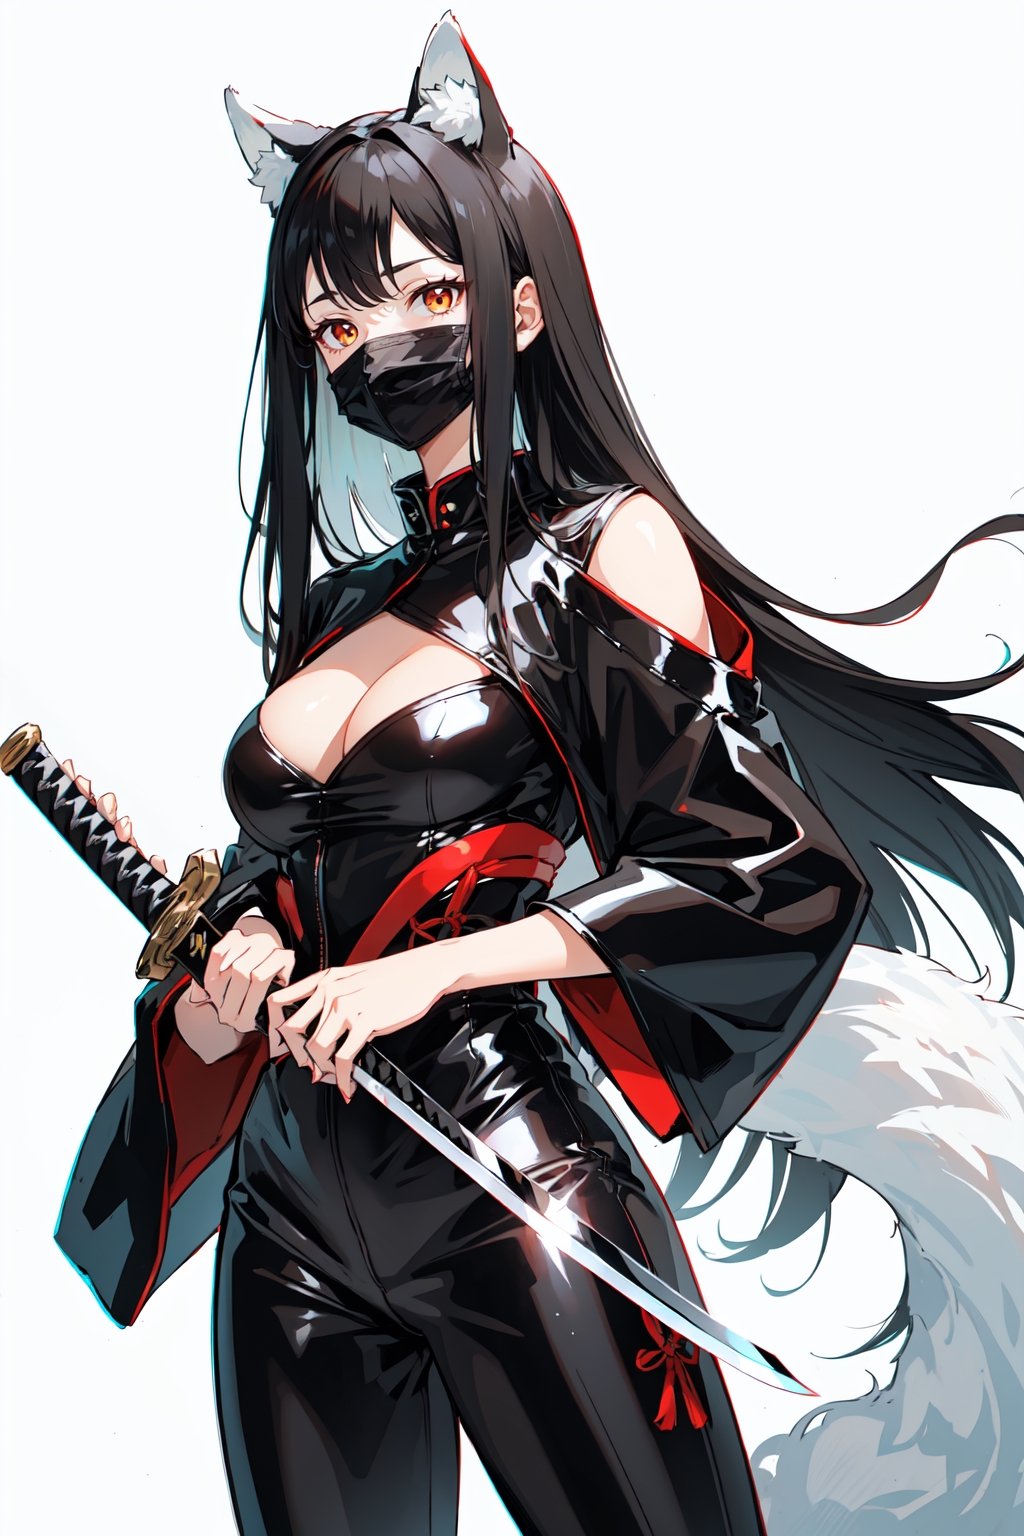 A girl with long black hair wearing a white kitsune mask with red designs, wearing a black leather jumpsuit and holding a katana sword in her hands 